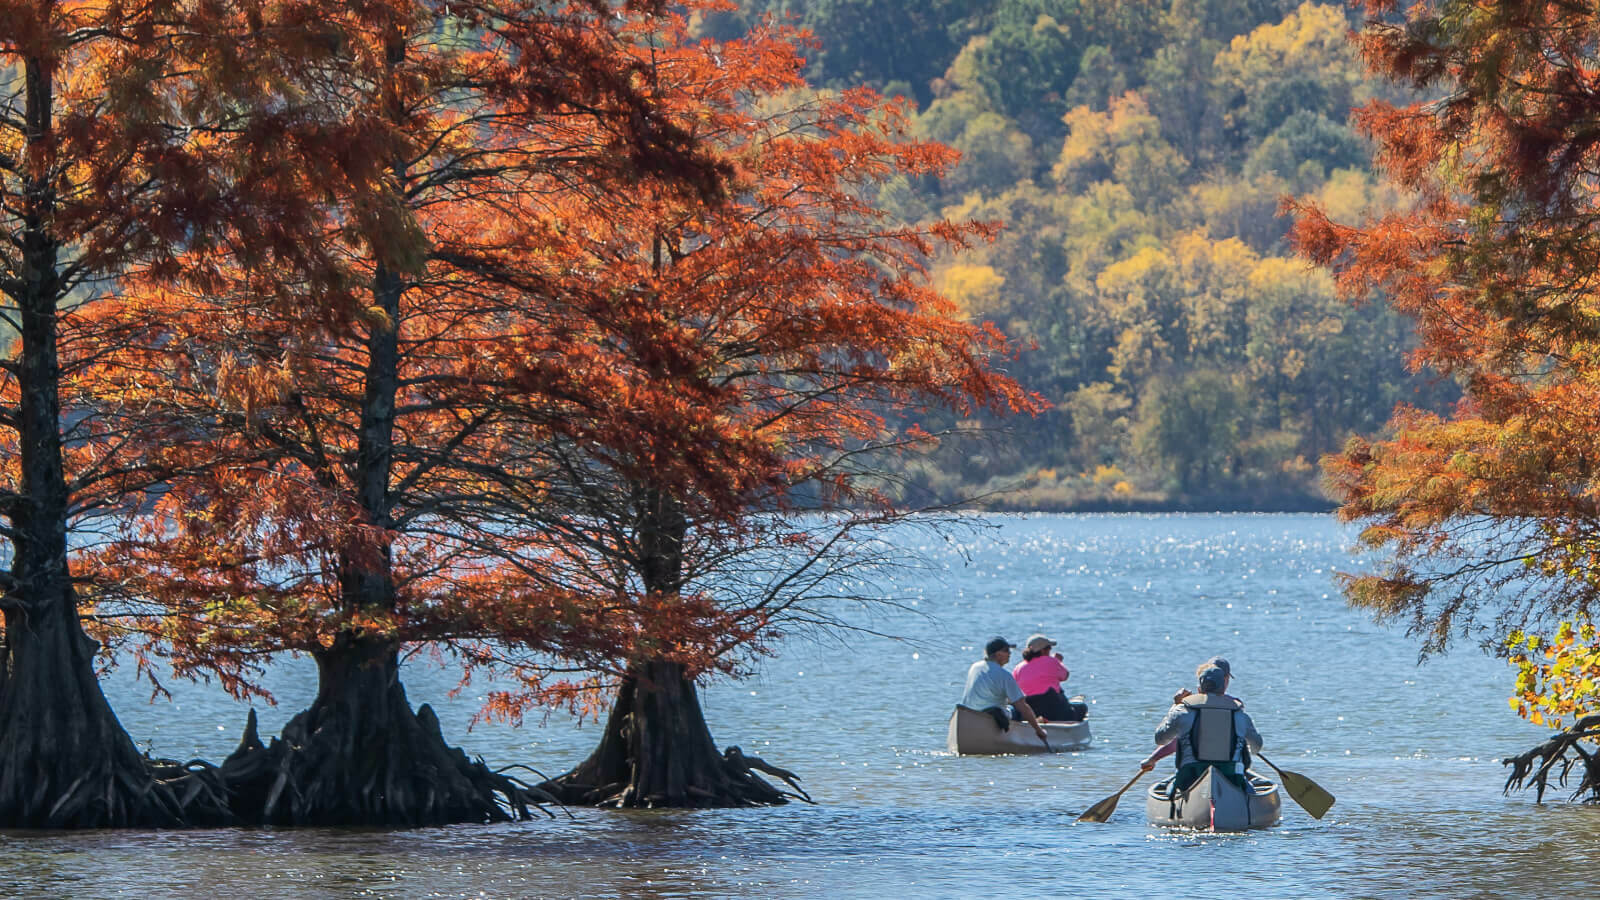 On the lake in fall